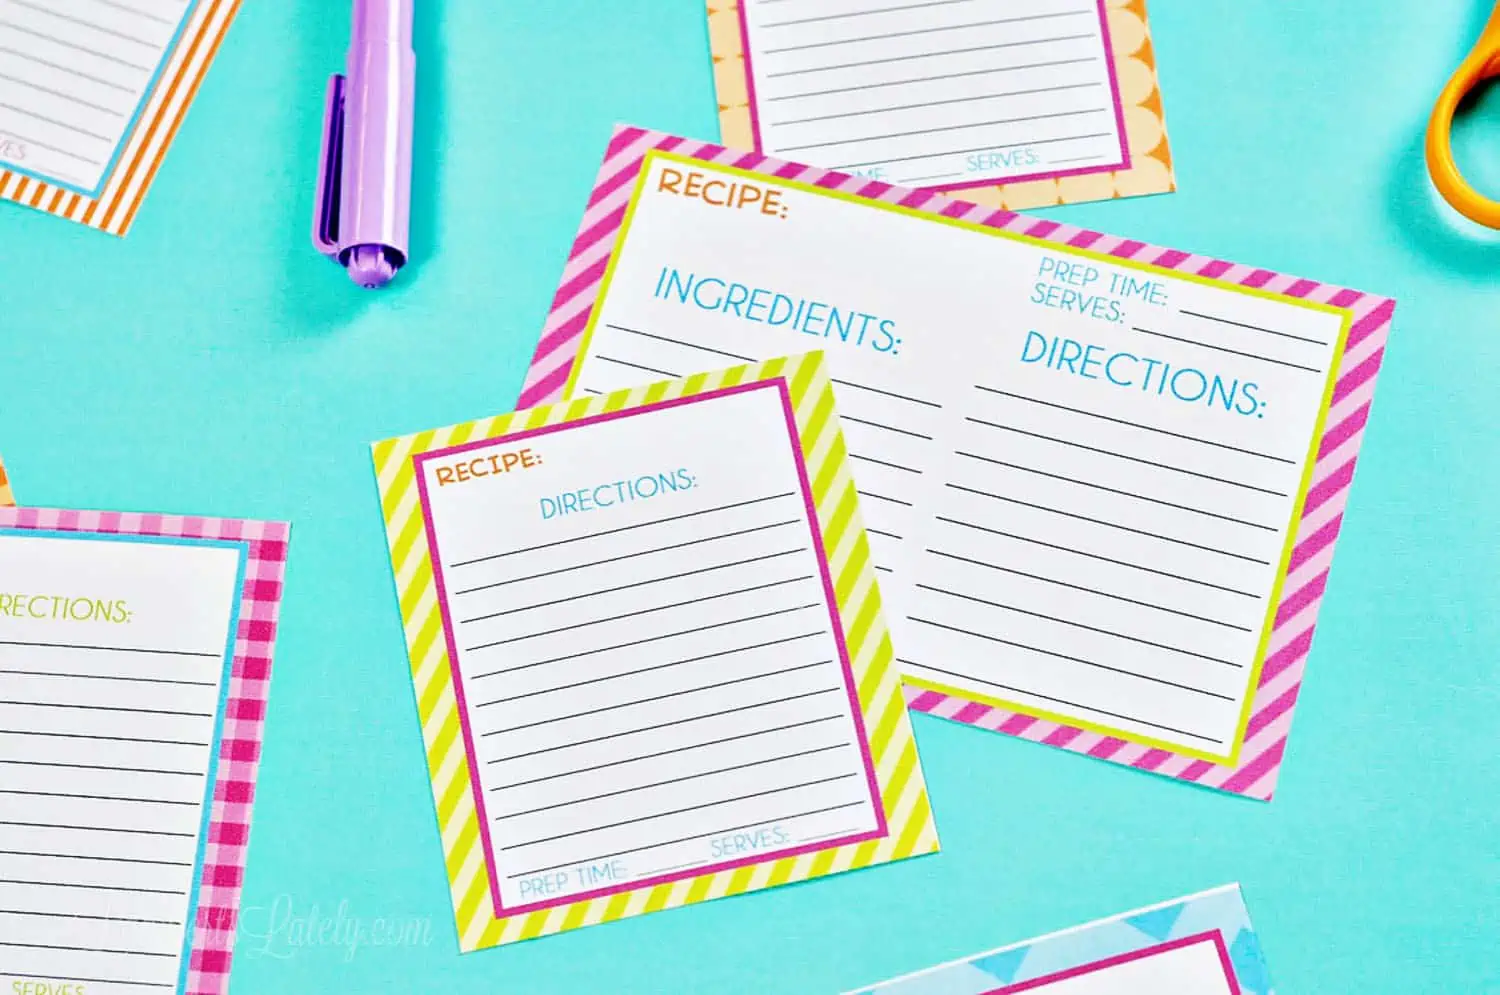 striped recipe cards on a blue background.